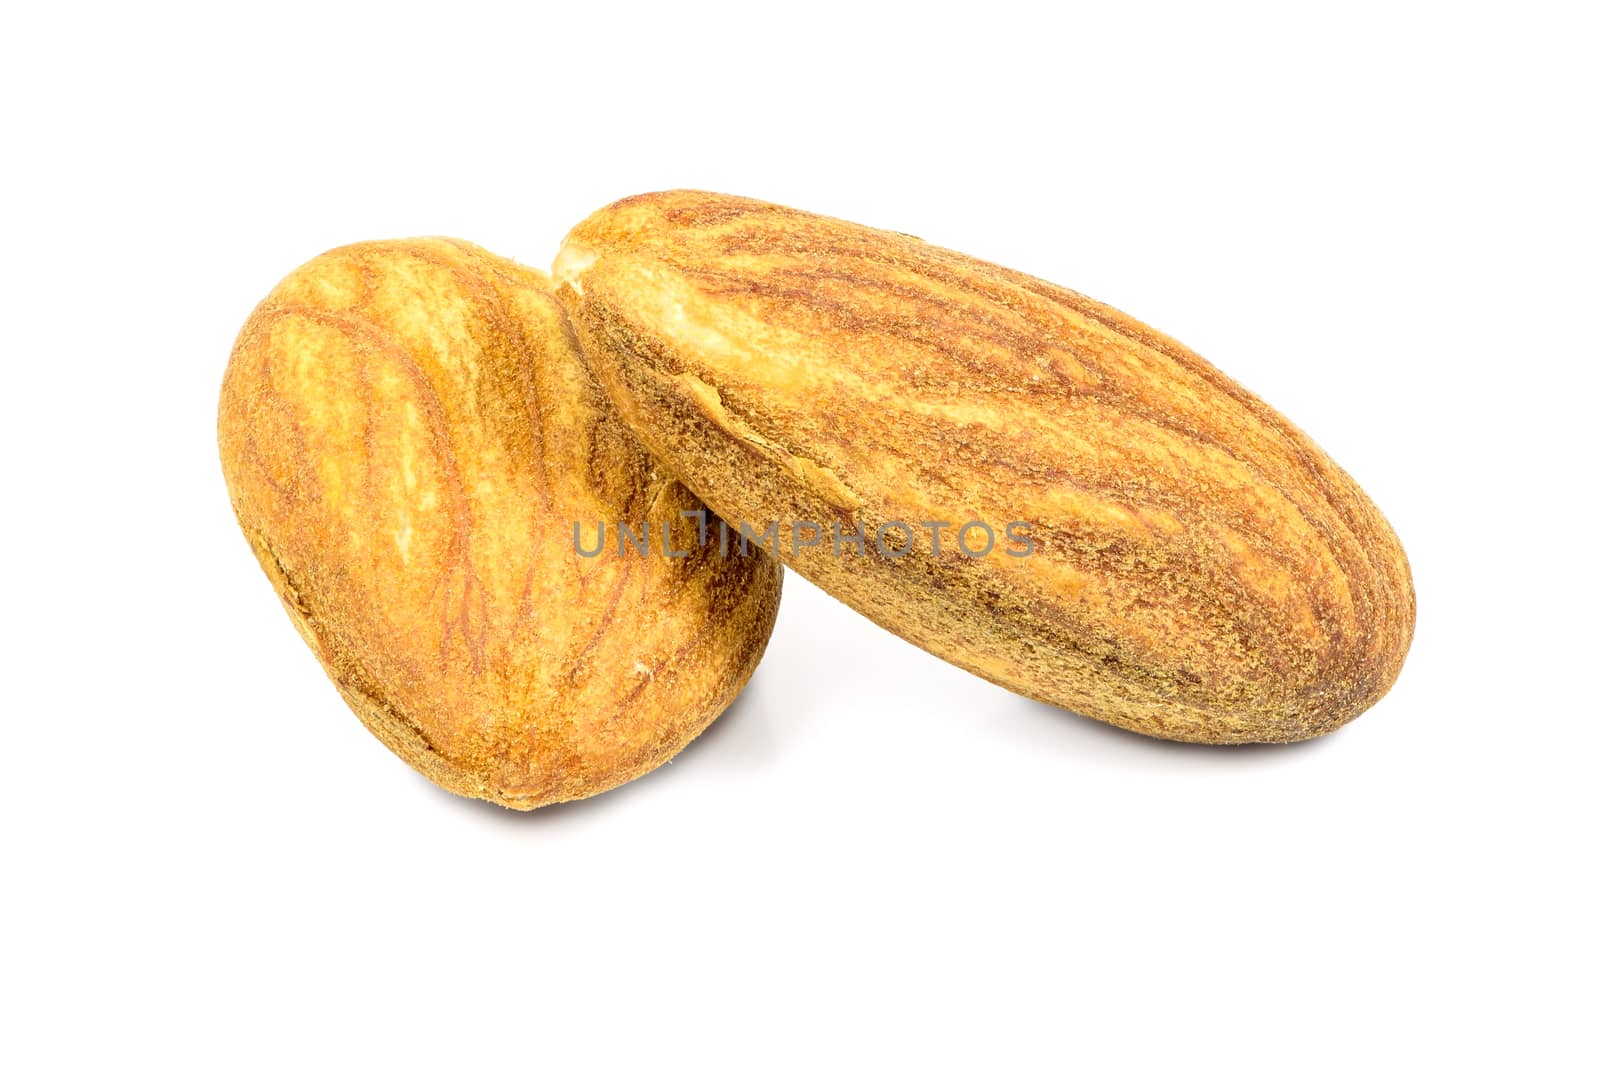 Almond nuts on white background by mkos83